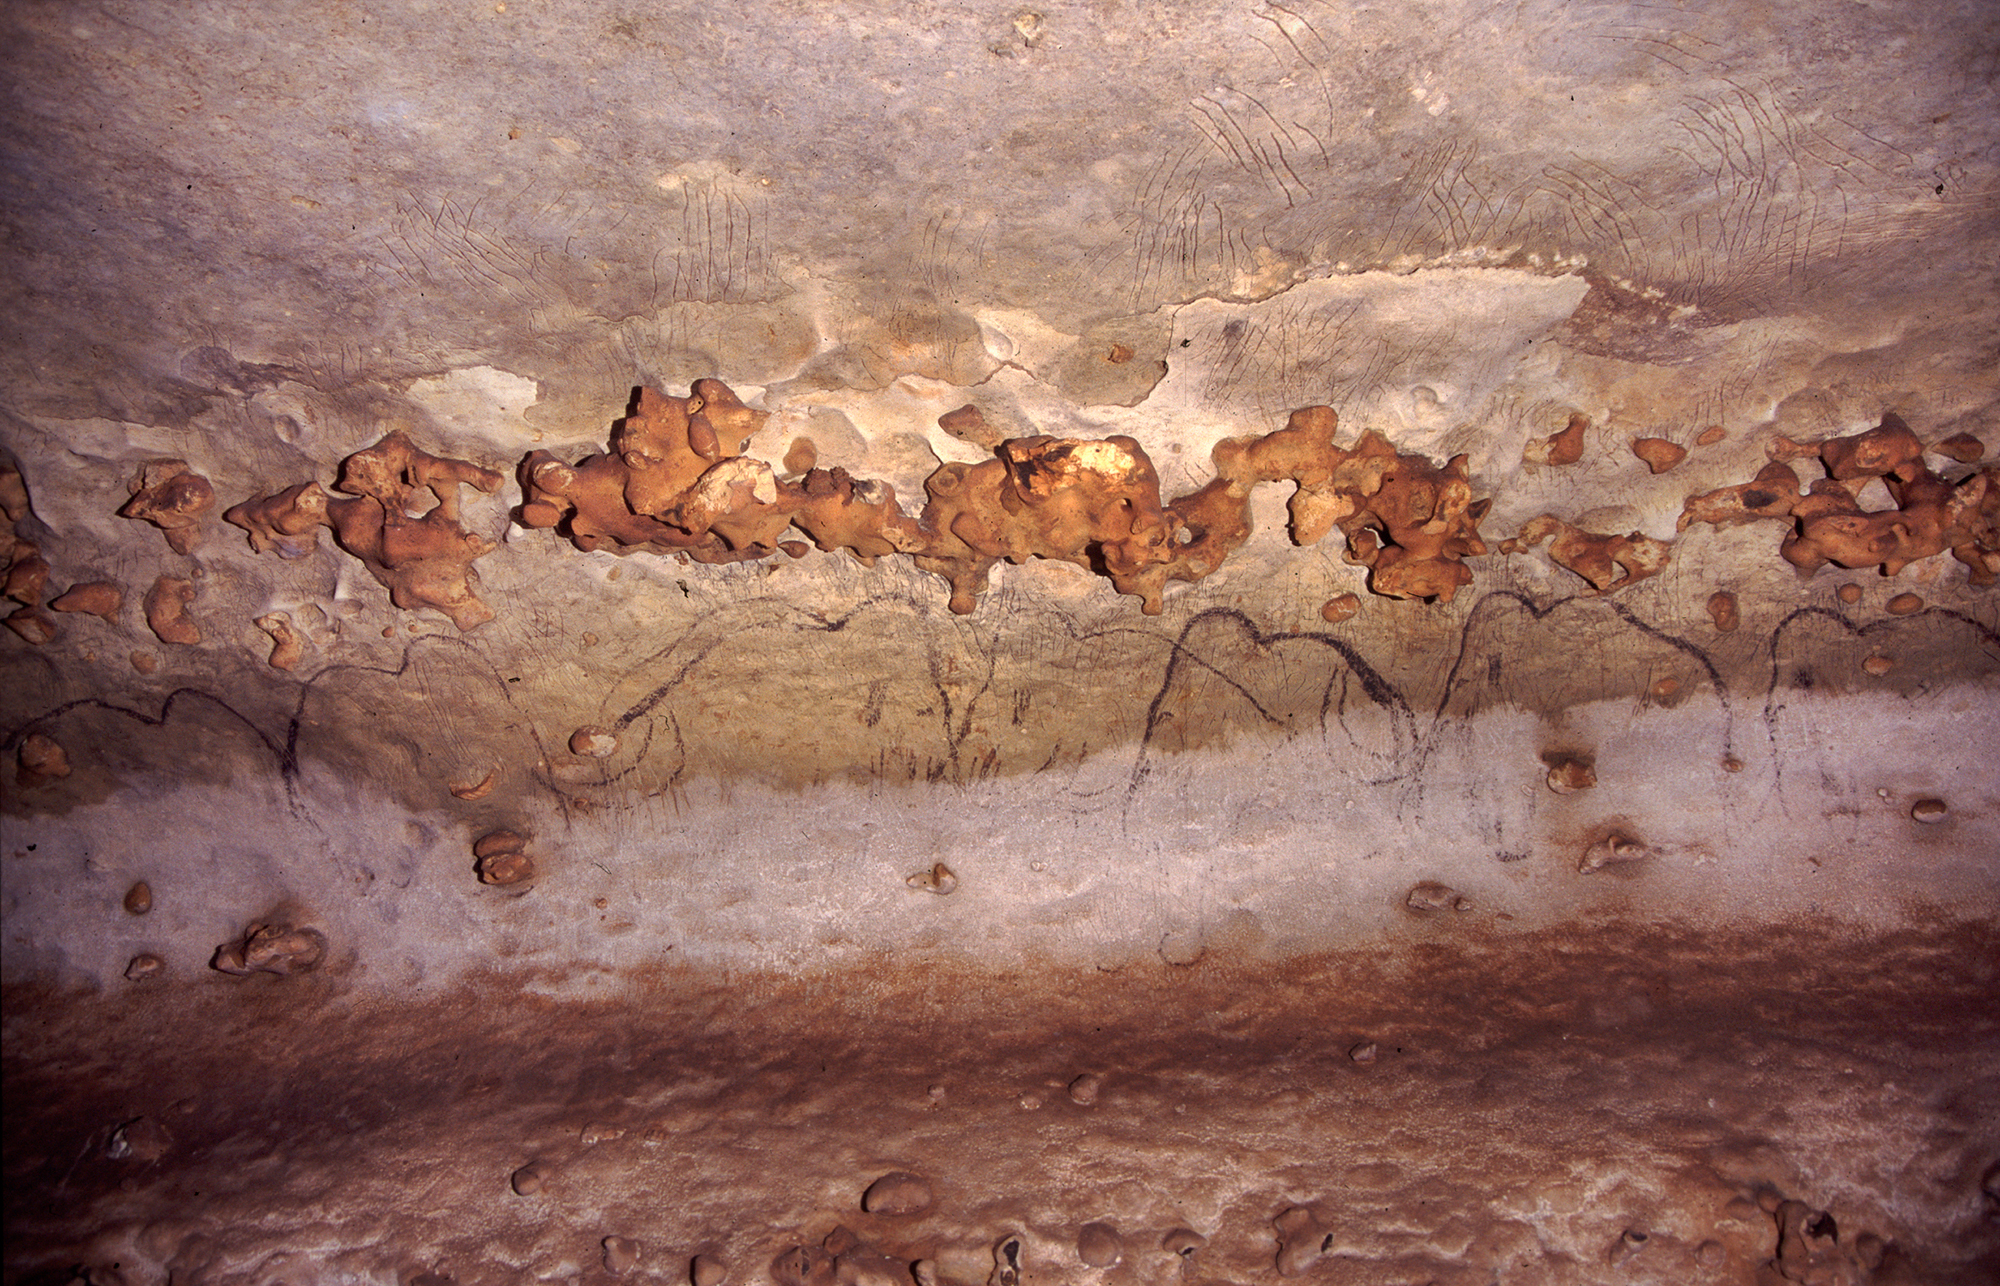 Dating the Rouffignac Cave Paintings